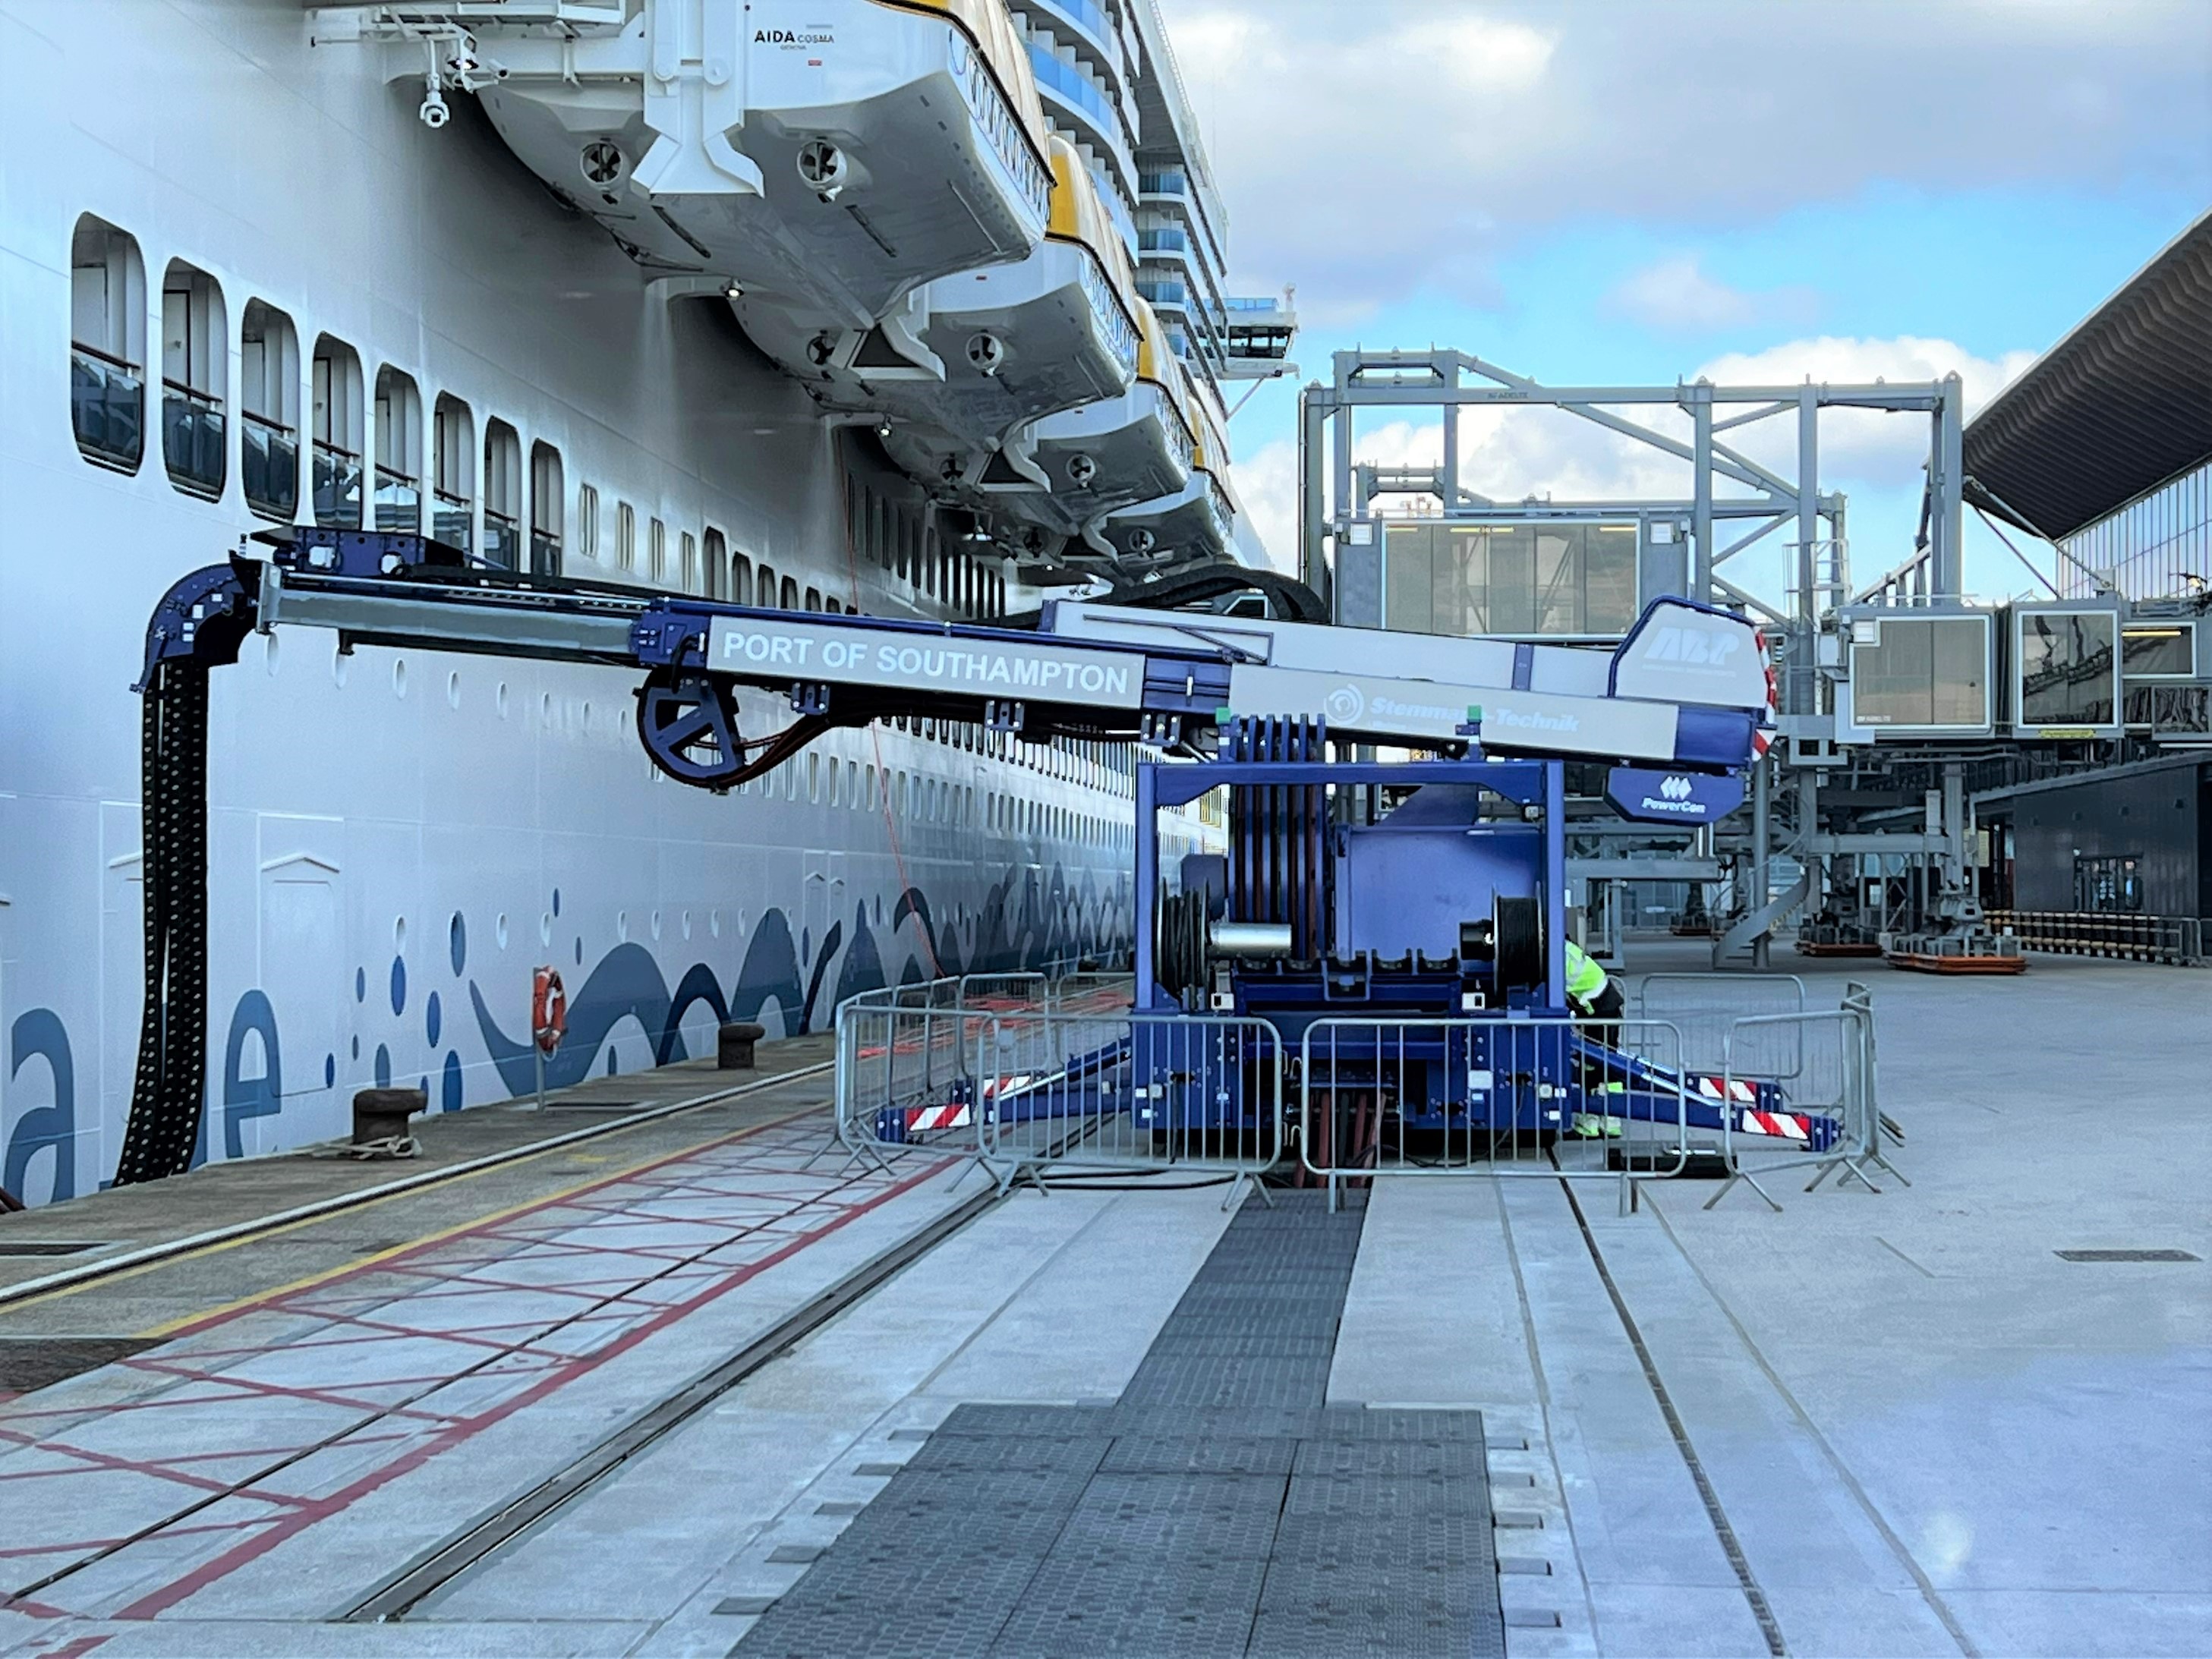 Shore power goes live at Port of Southampton. AIDAcosma connects to shore power at Horizon Cruise Terminal  (Image - April 2022)